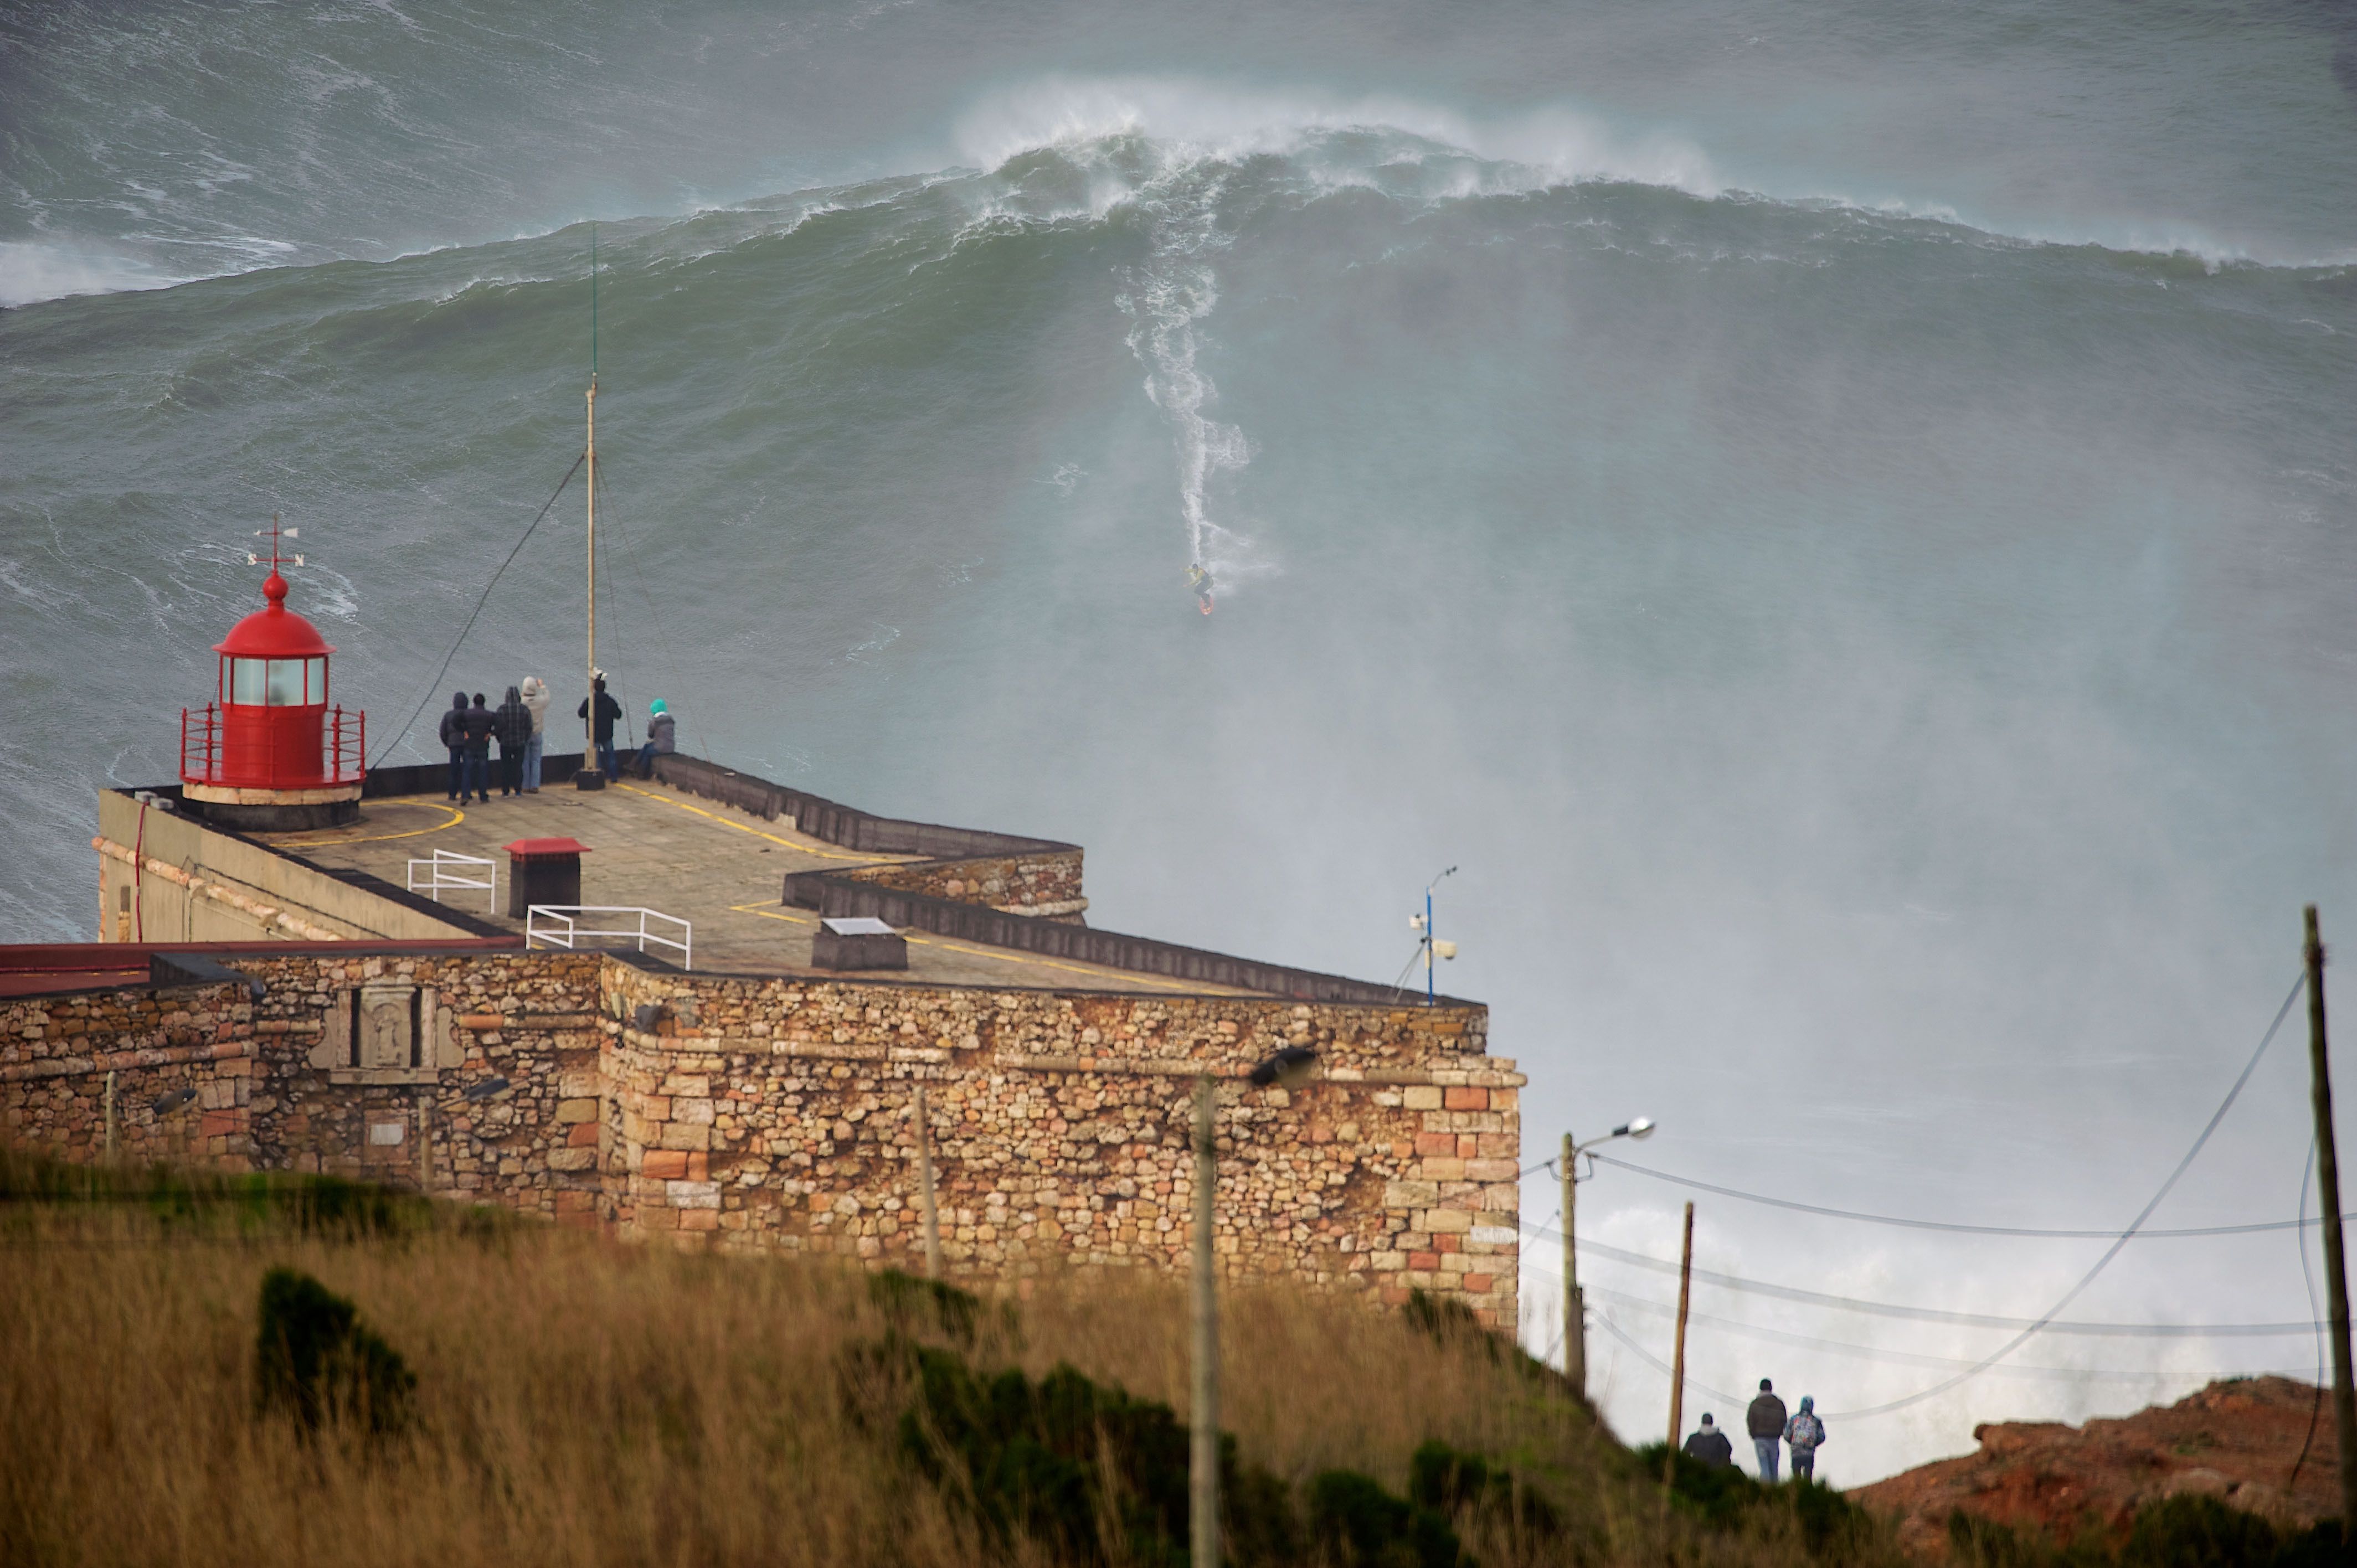 Portugal's Monster: The Mechanics Of A Massive Wave, The Two Way